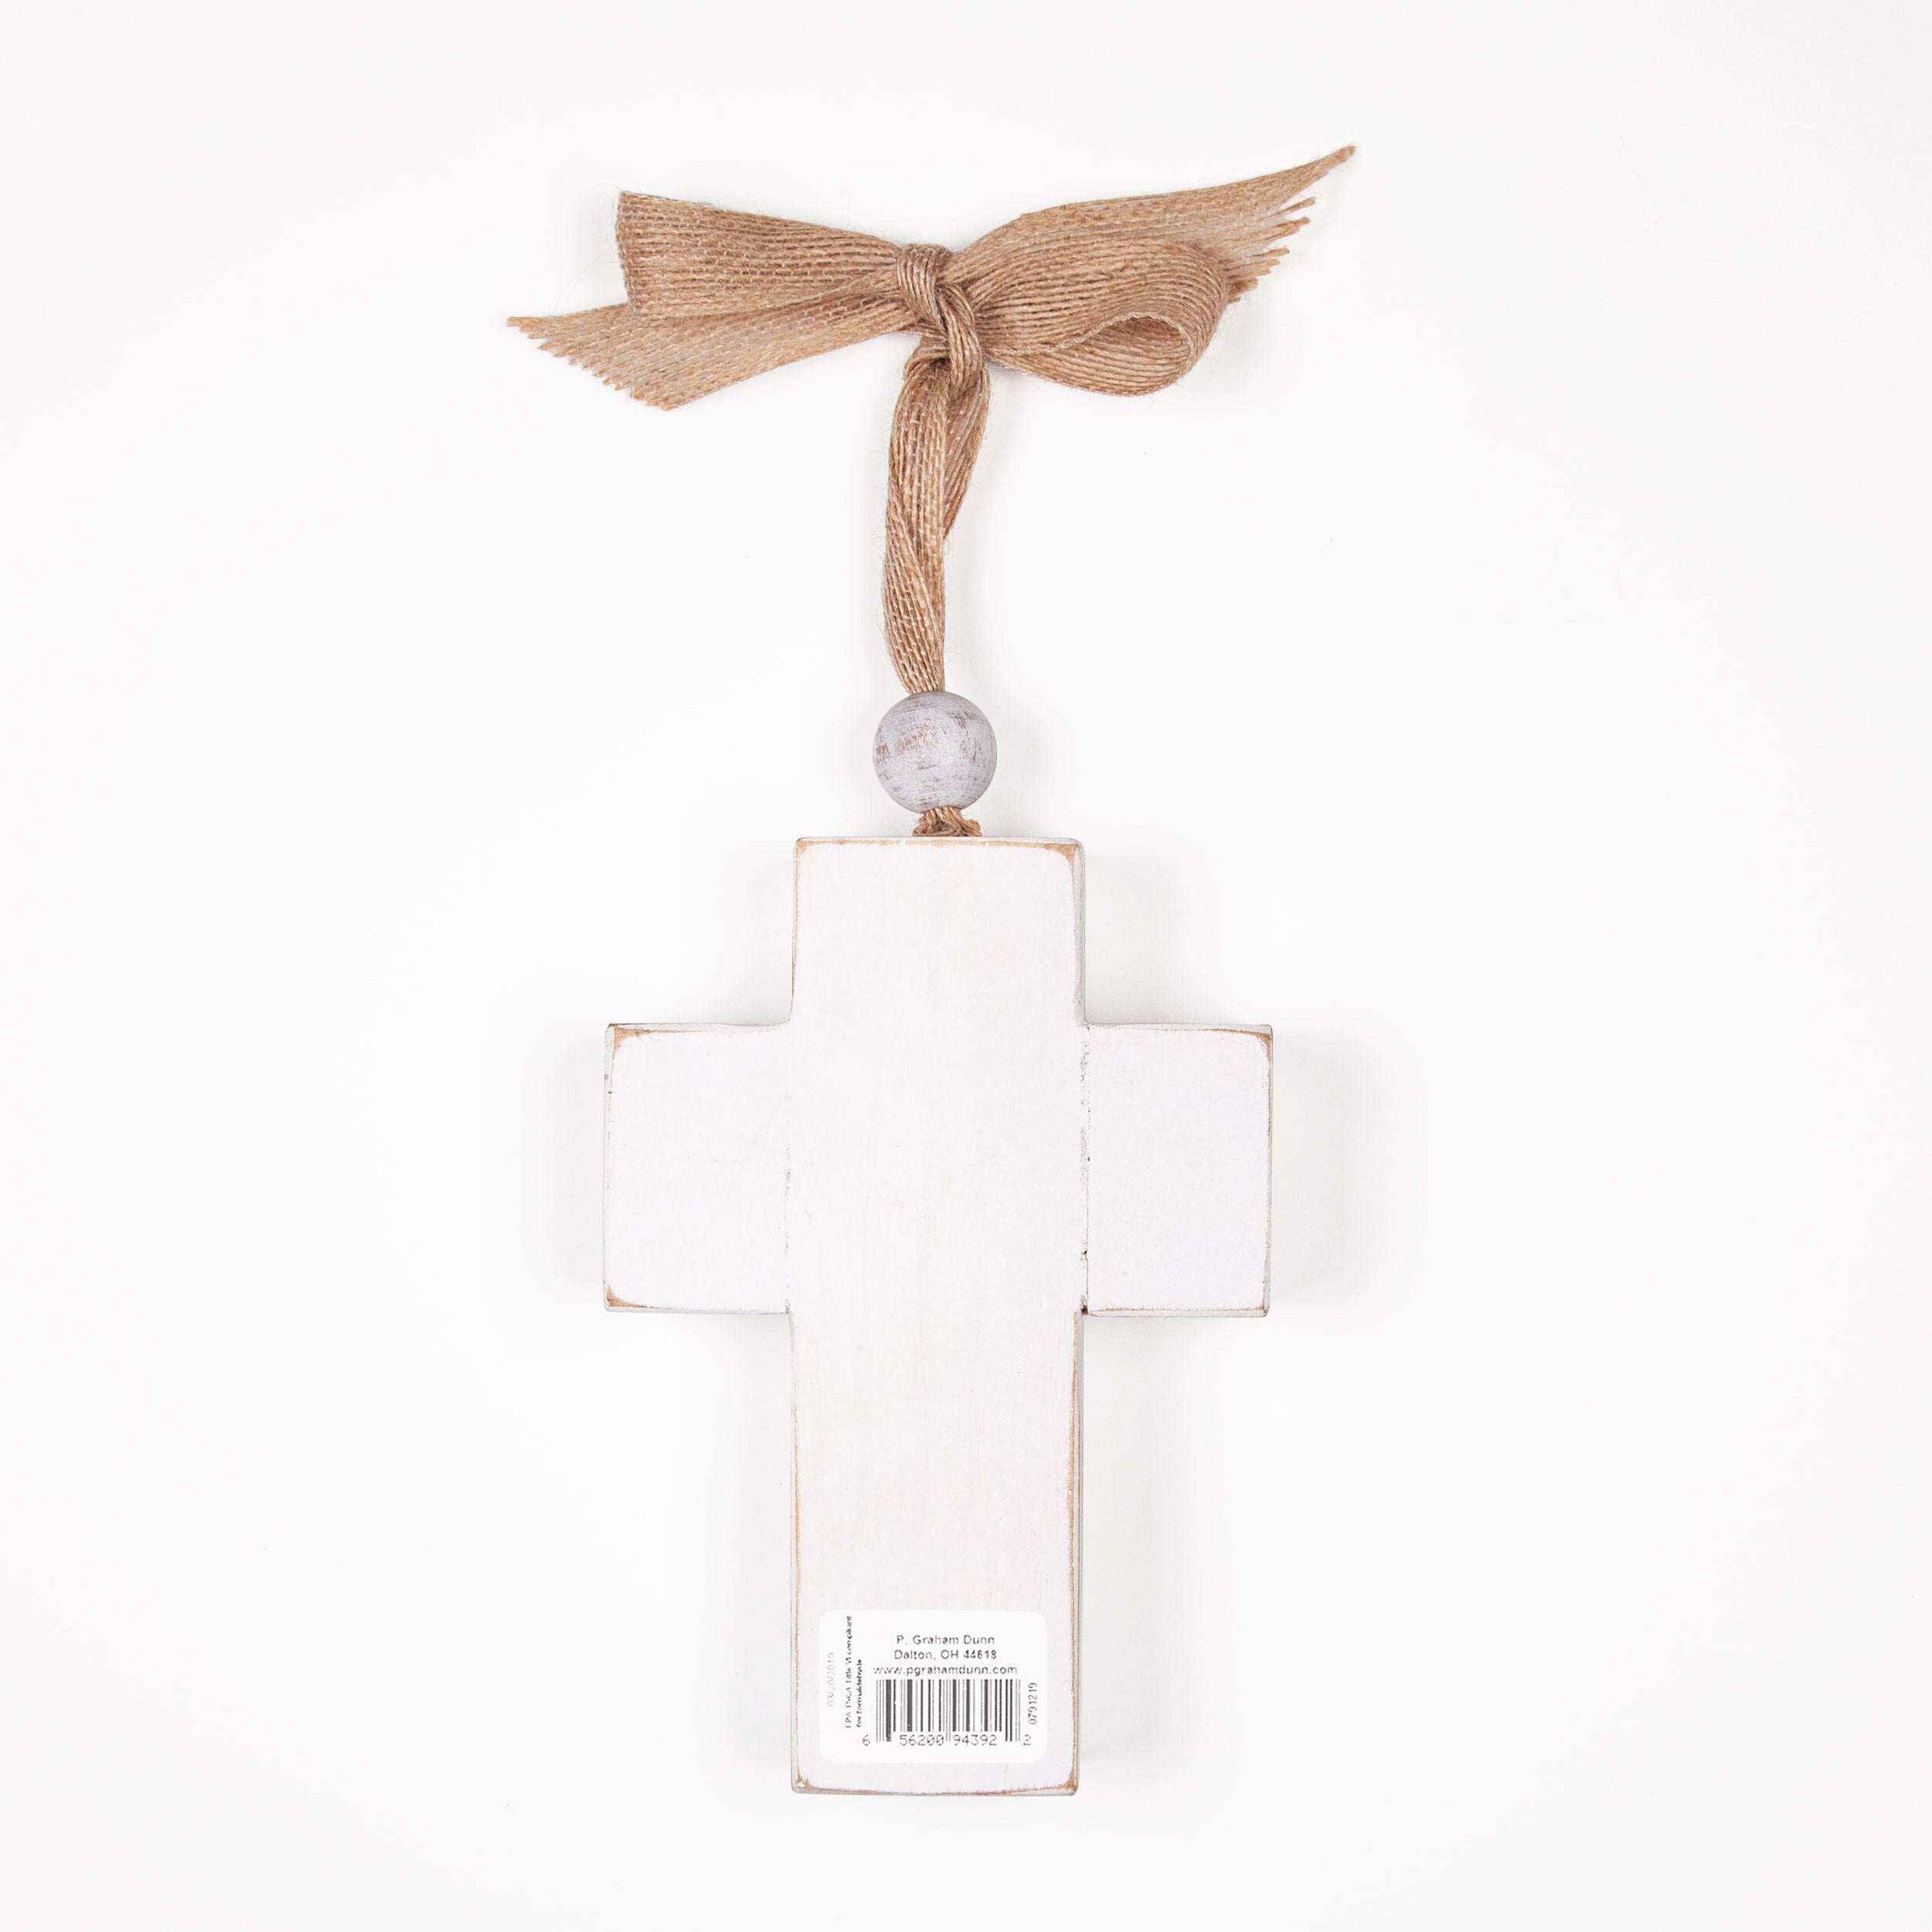 How Great Thou Art Distressed Cross with Ribbon